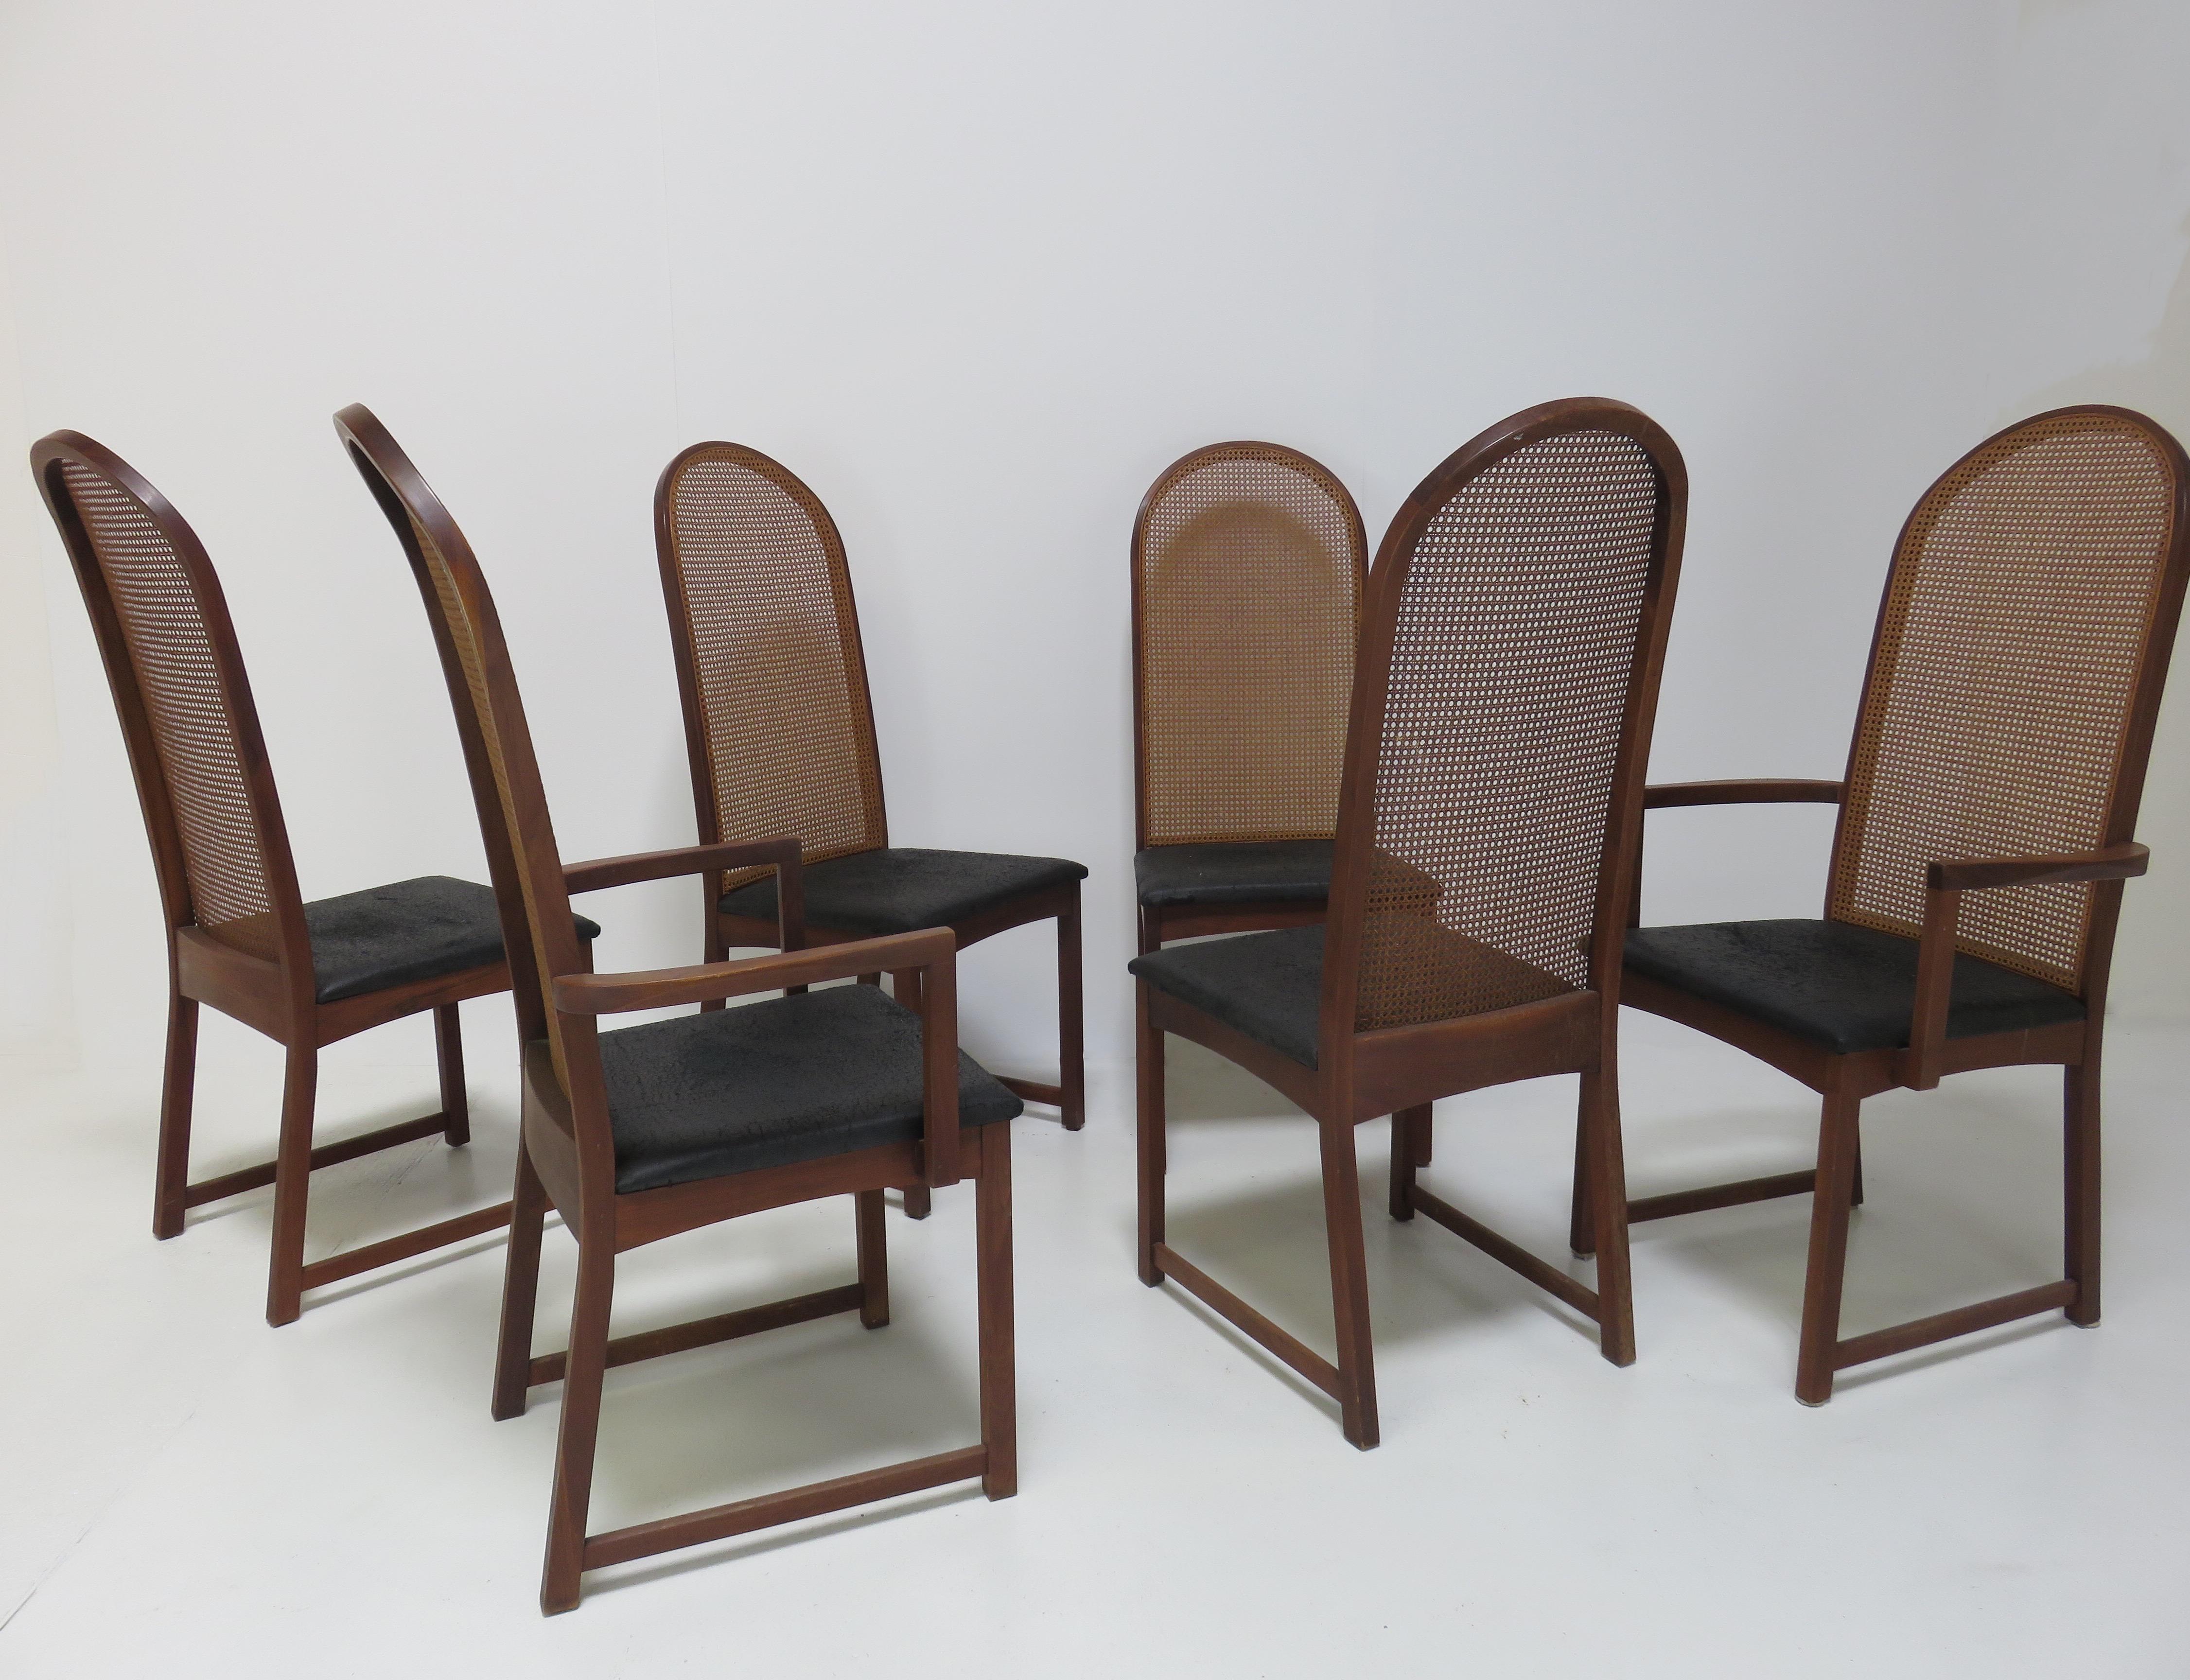 A set of six dining chairs by Milo Baughman. Comprising four side chairs and two armchairs, each with cane backs and black vinyl seats with mahogany frames.